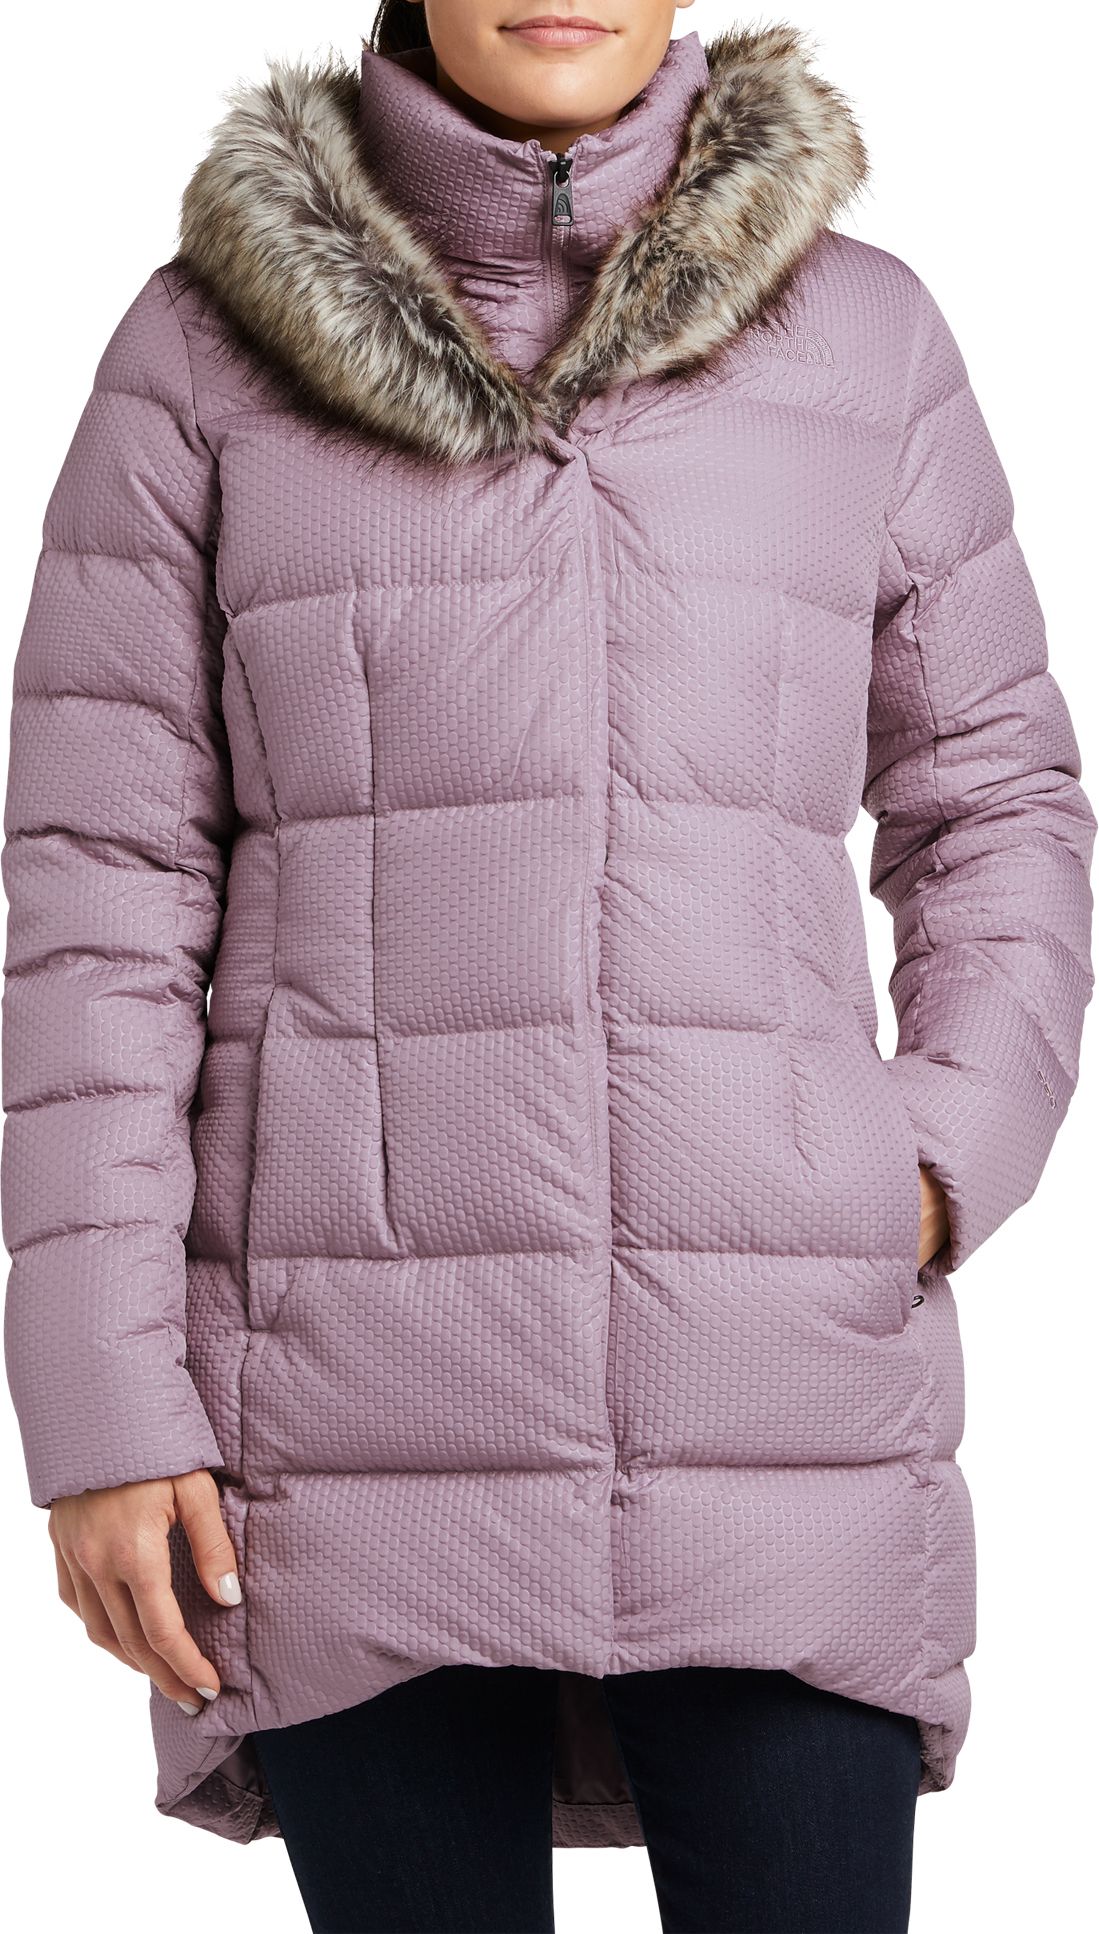 north face women's coat with fur hood